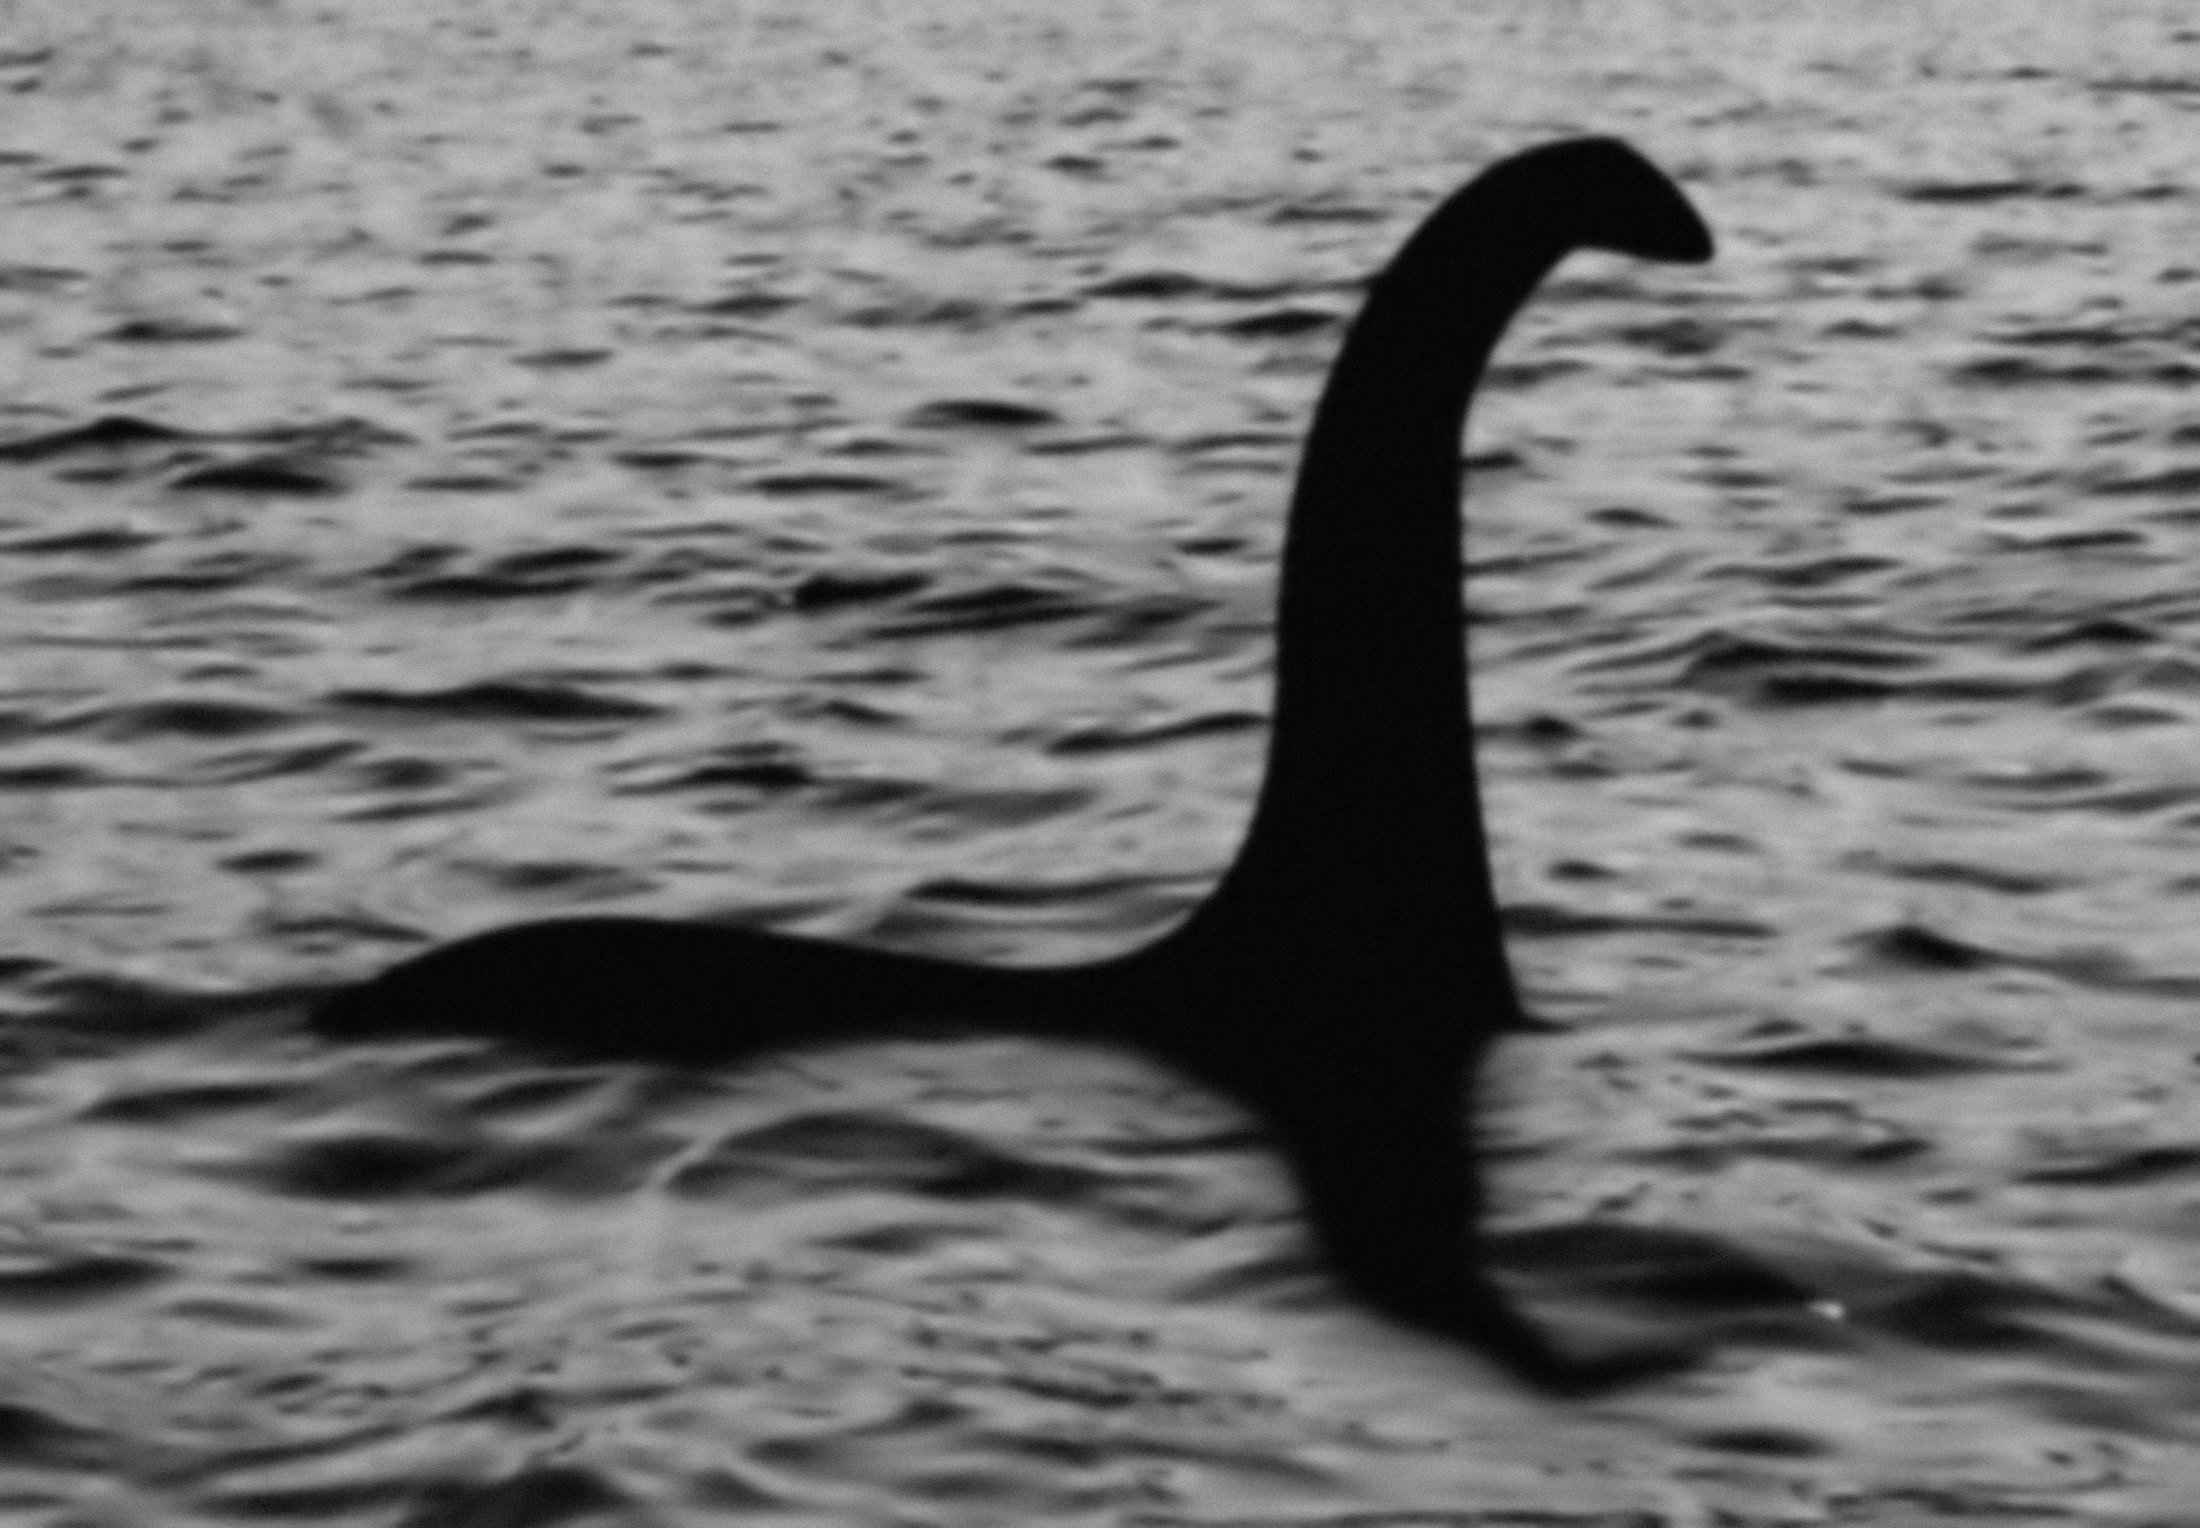 Facts, Not Myths, About the Loch Ness Monster